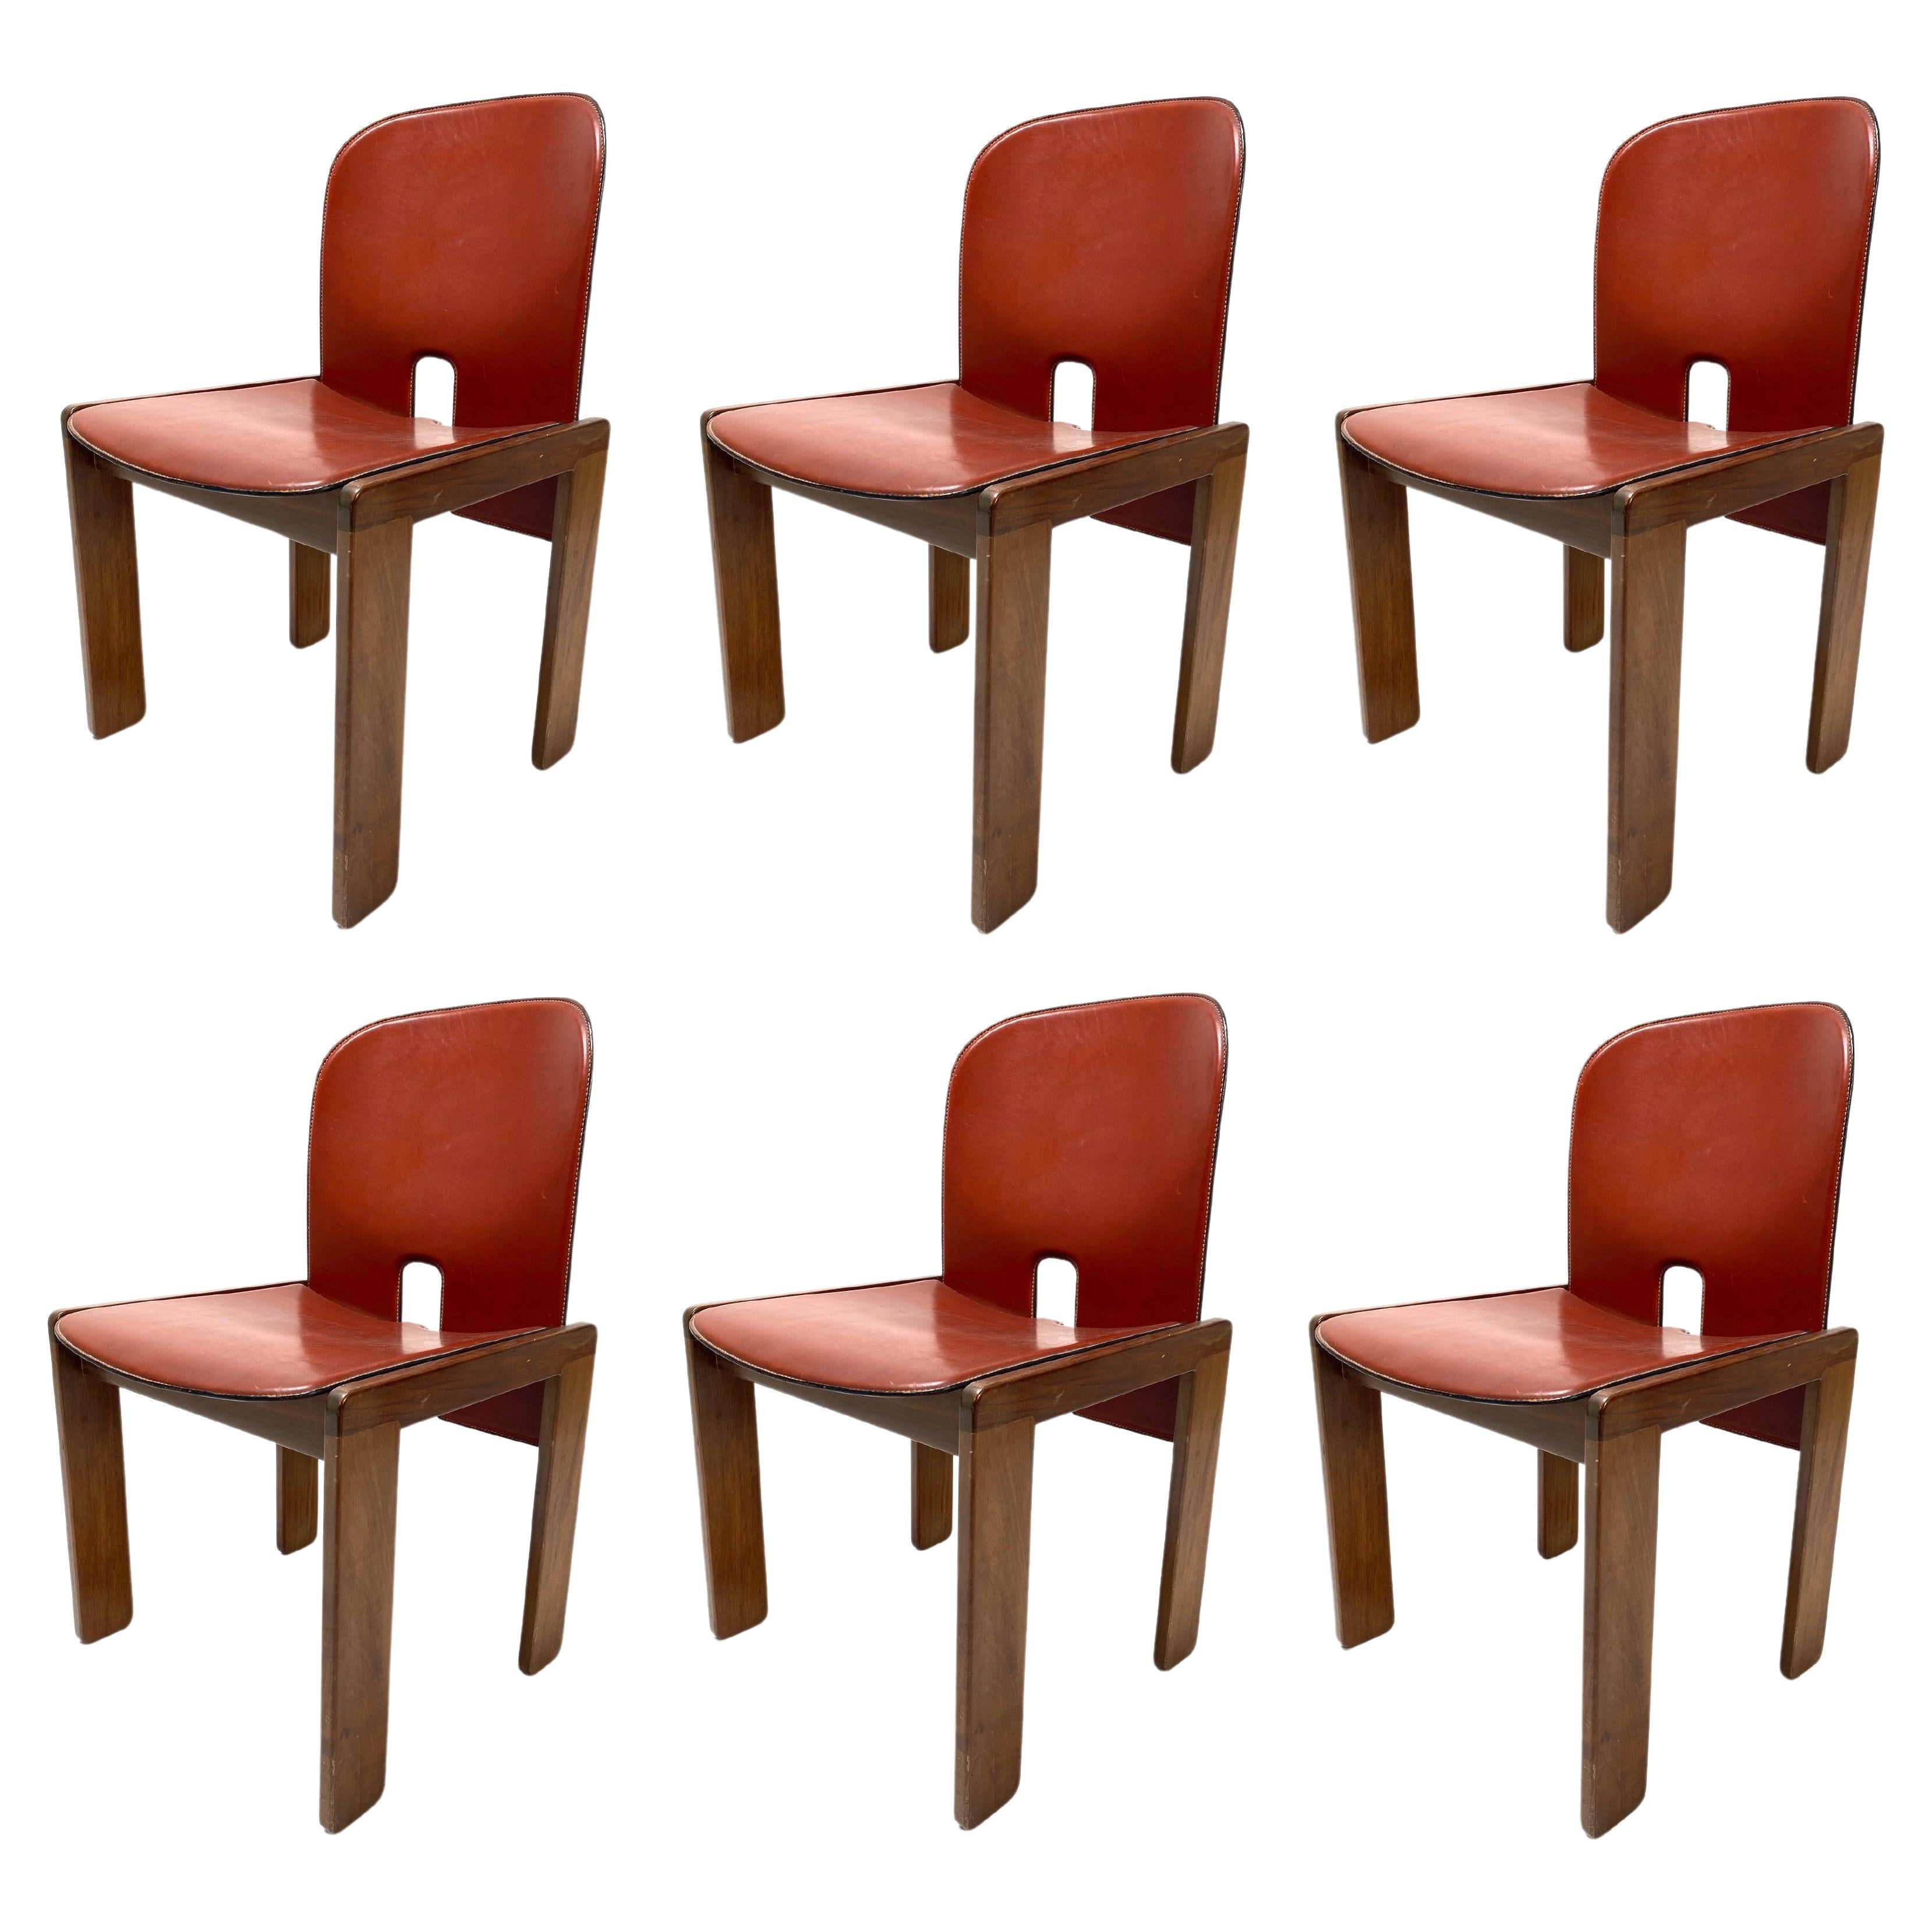 Set of 6 Leather "121" Chairs by Tobia Scarpa for Cassina, Italy, 1967 For Sale